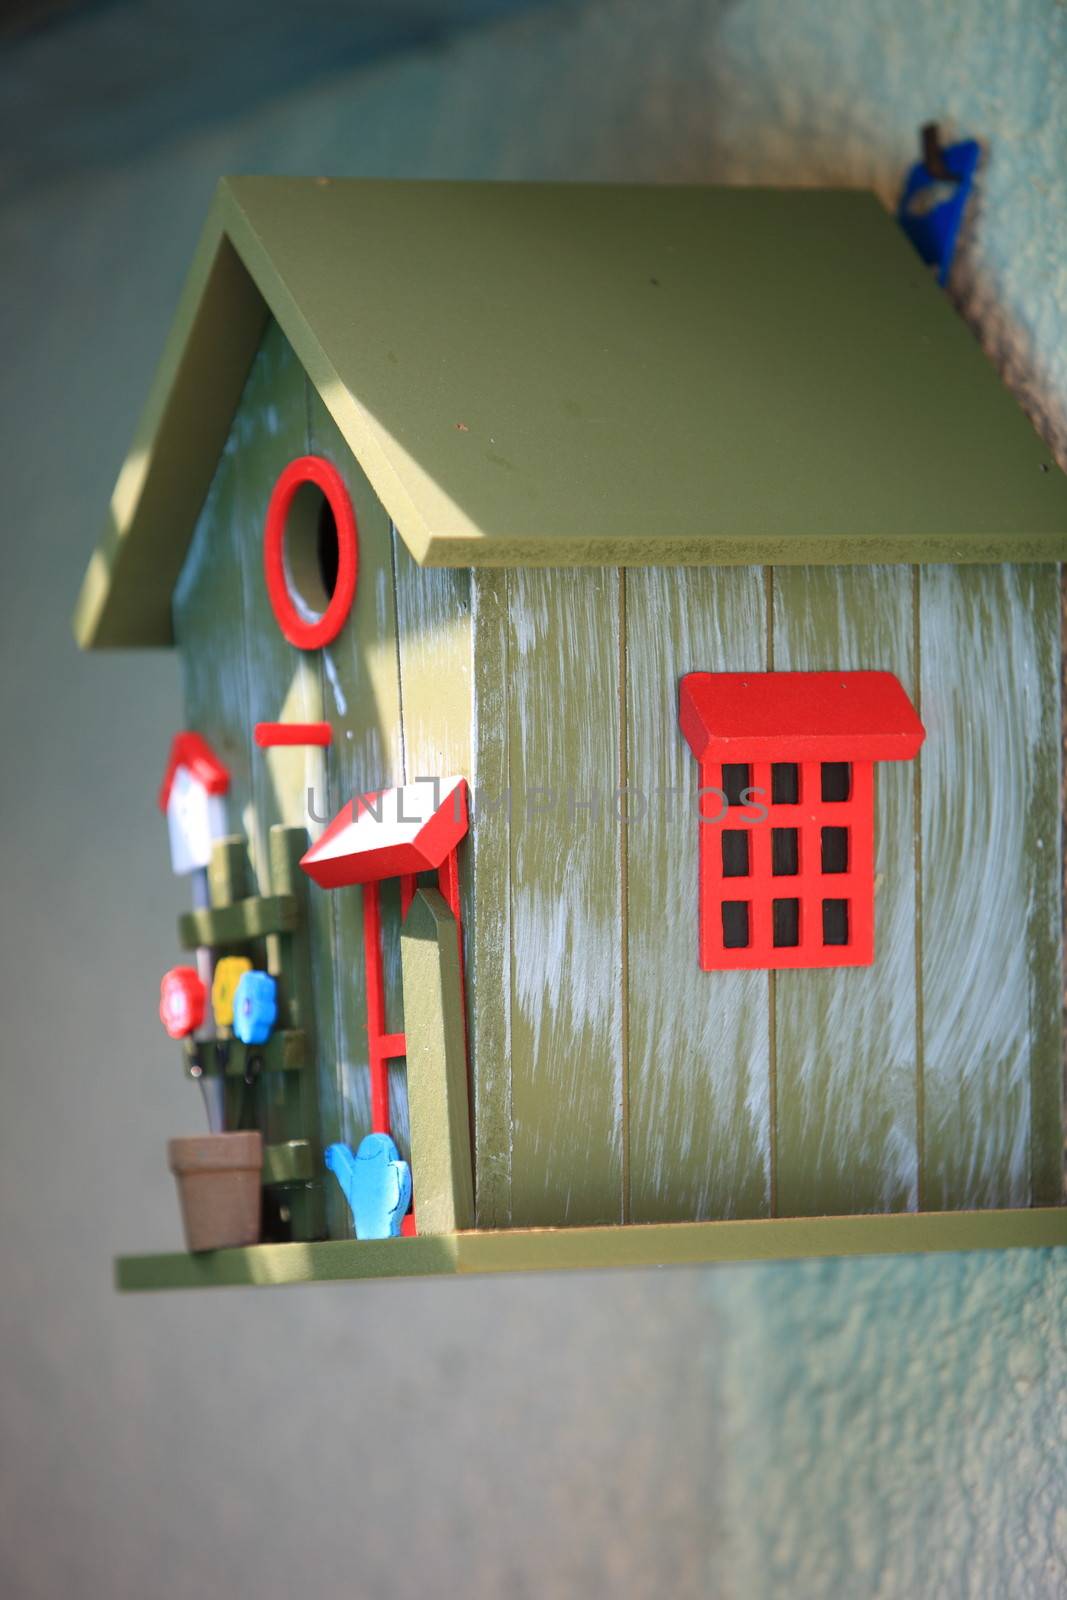 Decorative bird box in the shape of a house hanging on an exterior wall providing a secure place for wild birds to nest and breed